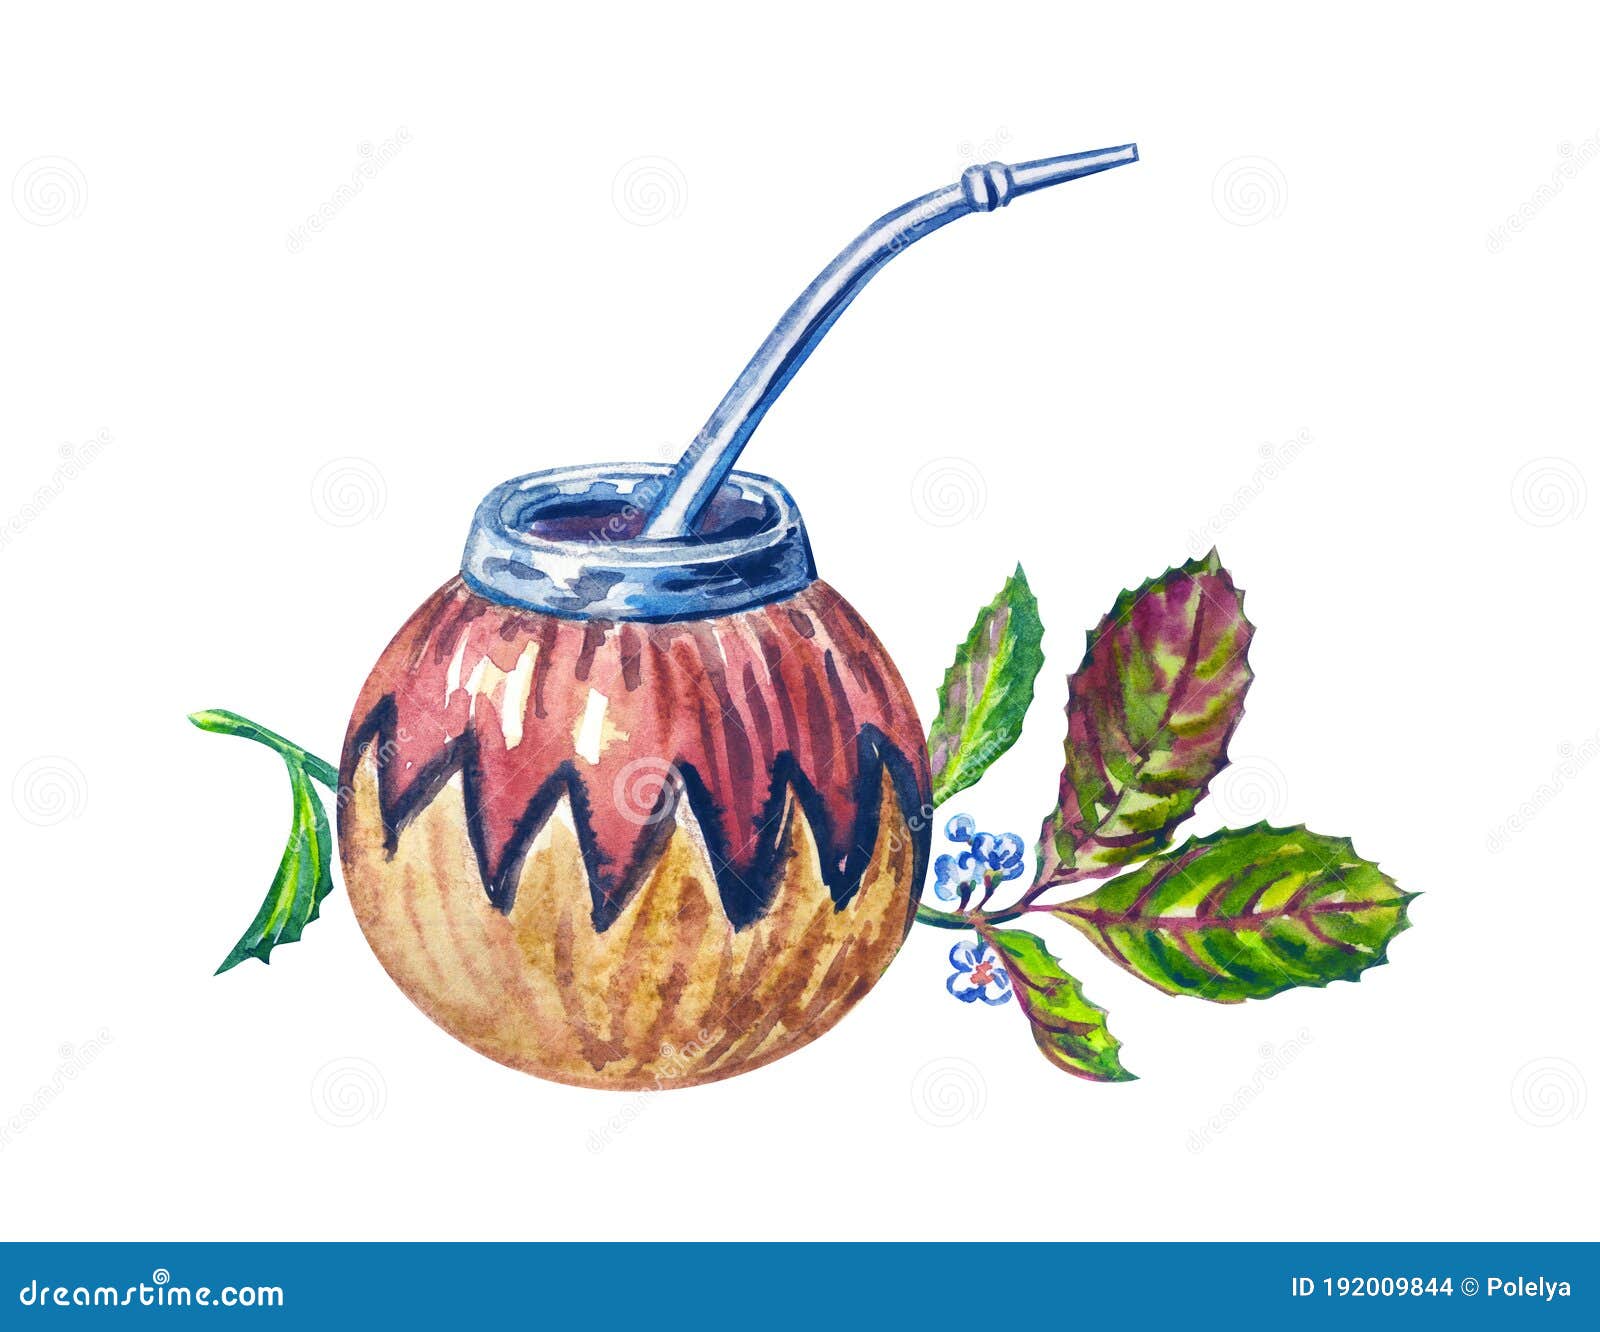 mate drink in calabash with bombilla and leaves of paraguayan holly, watercolo